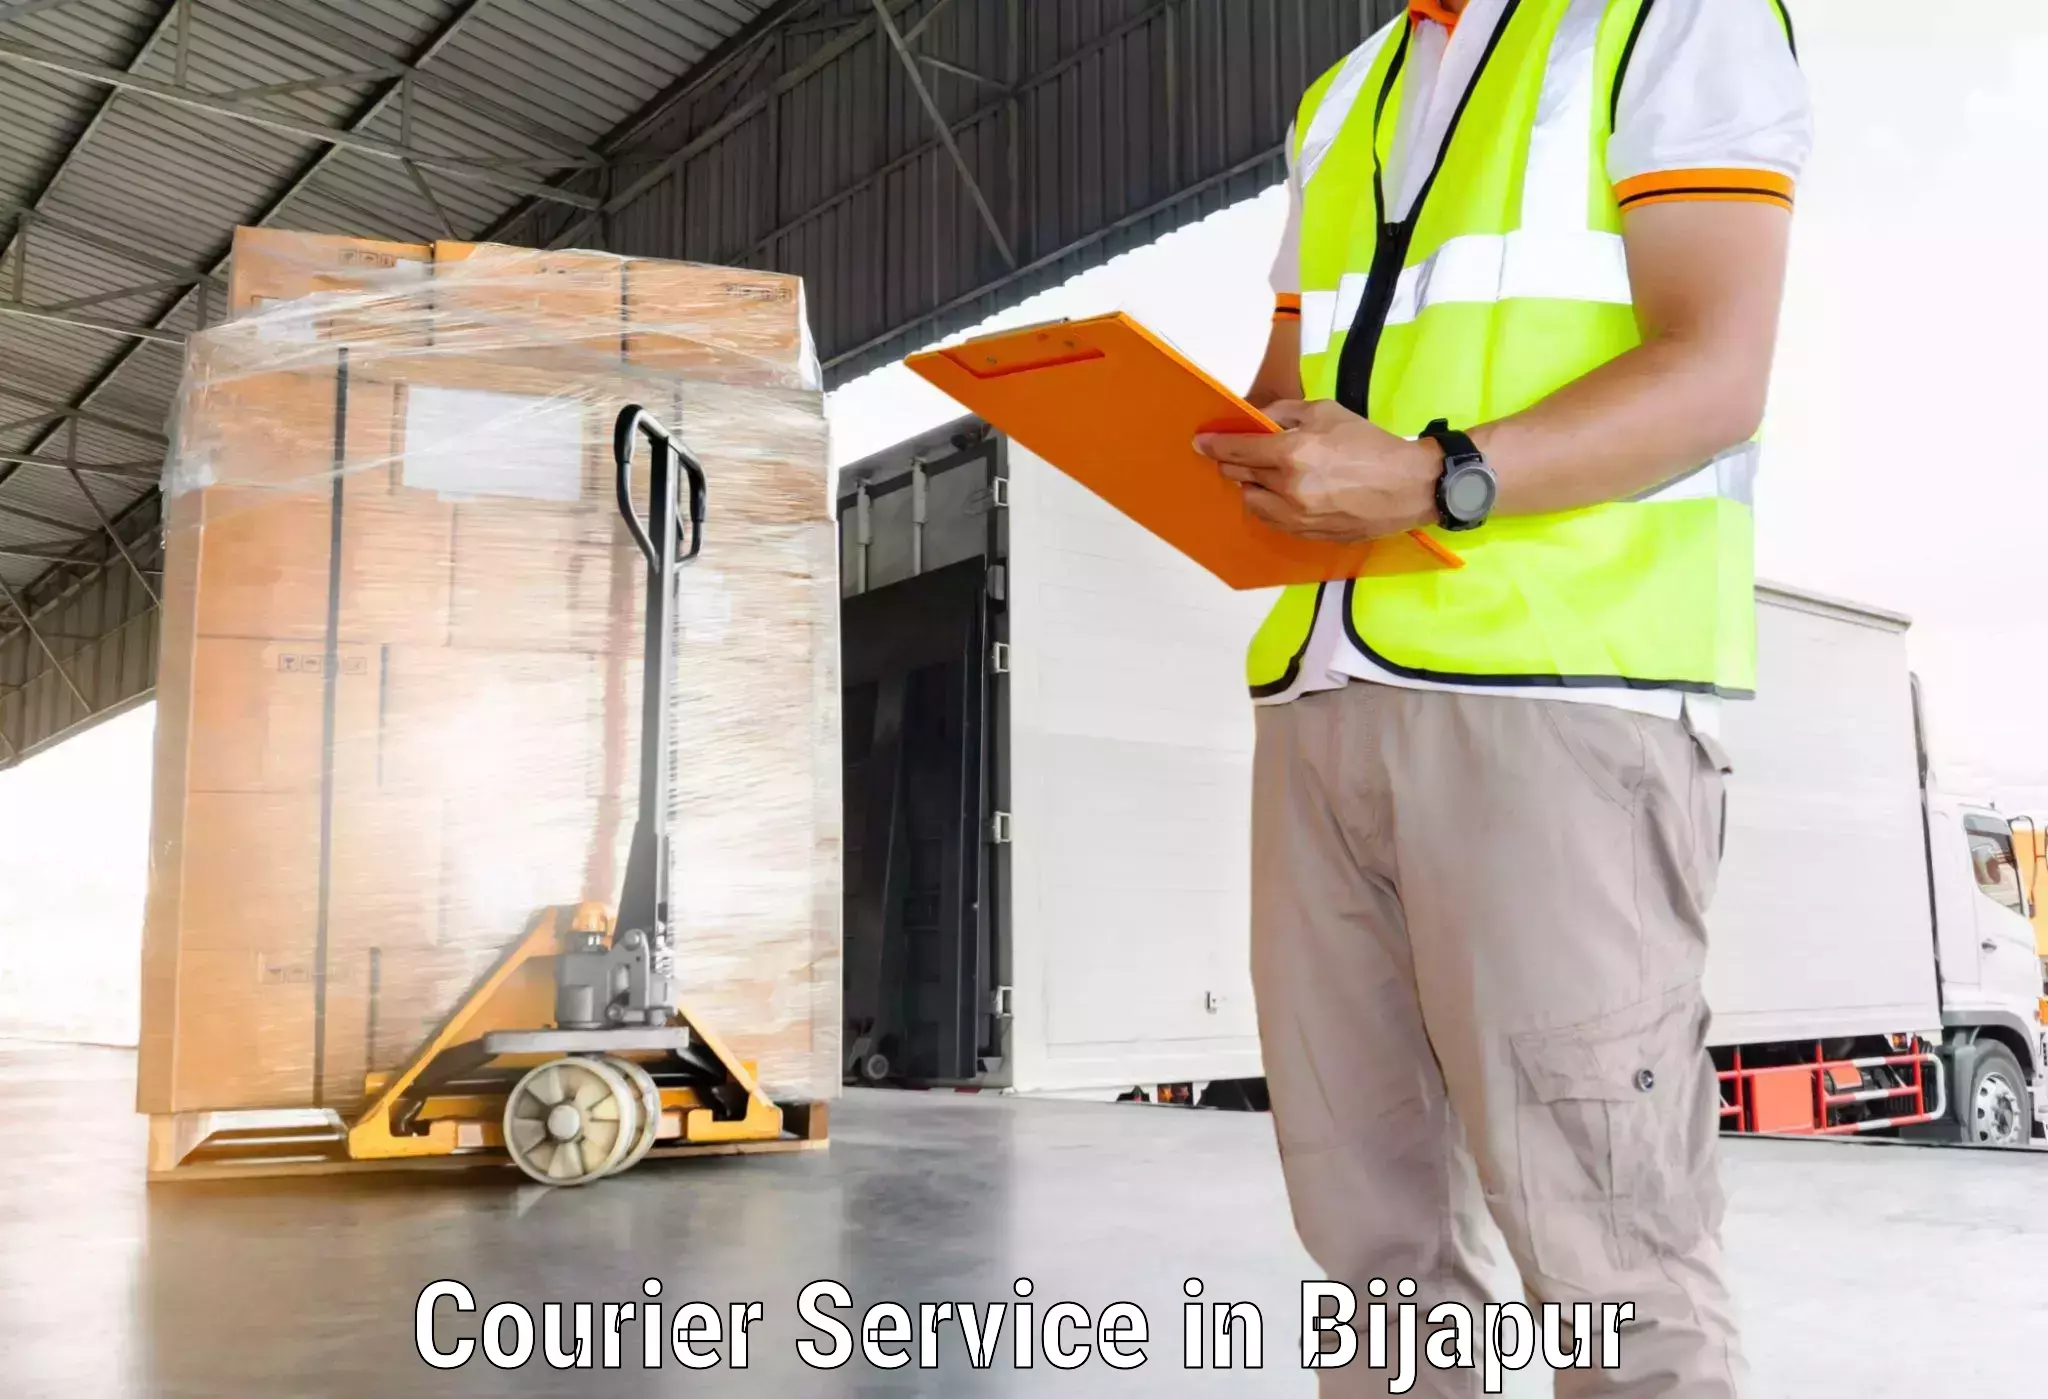 Reliable shipping solutions in Bijapur